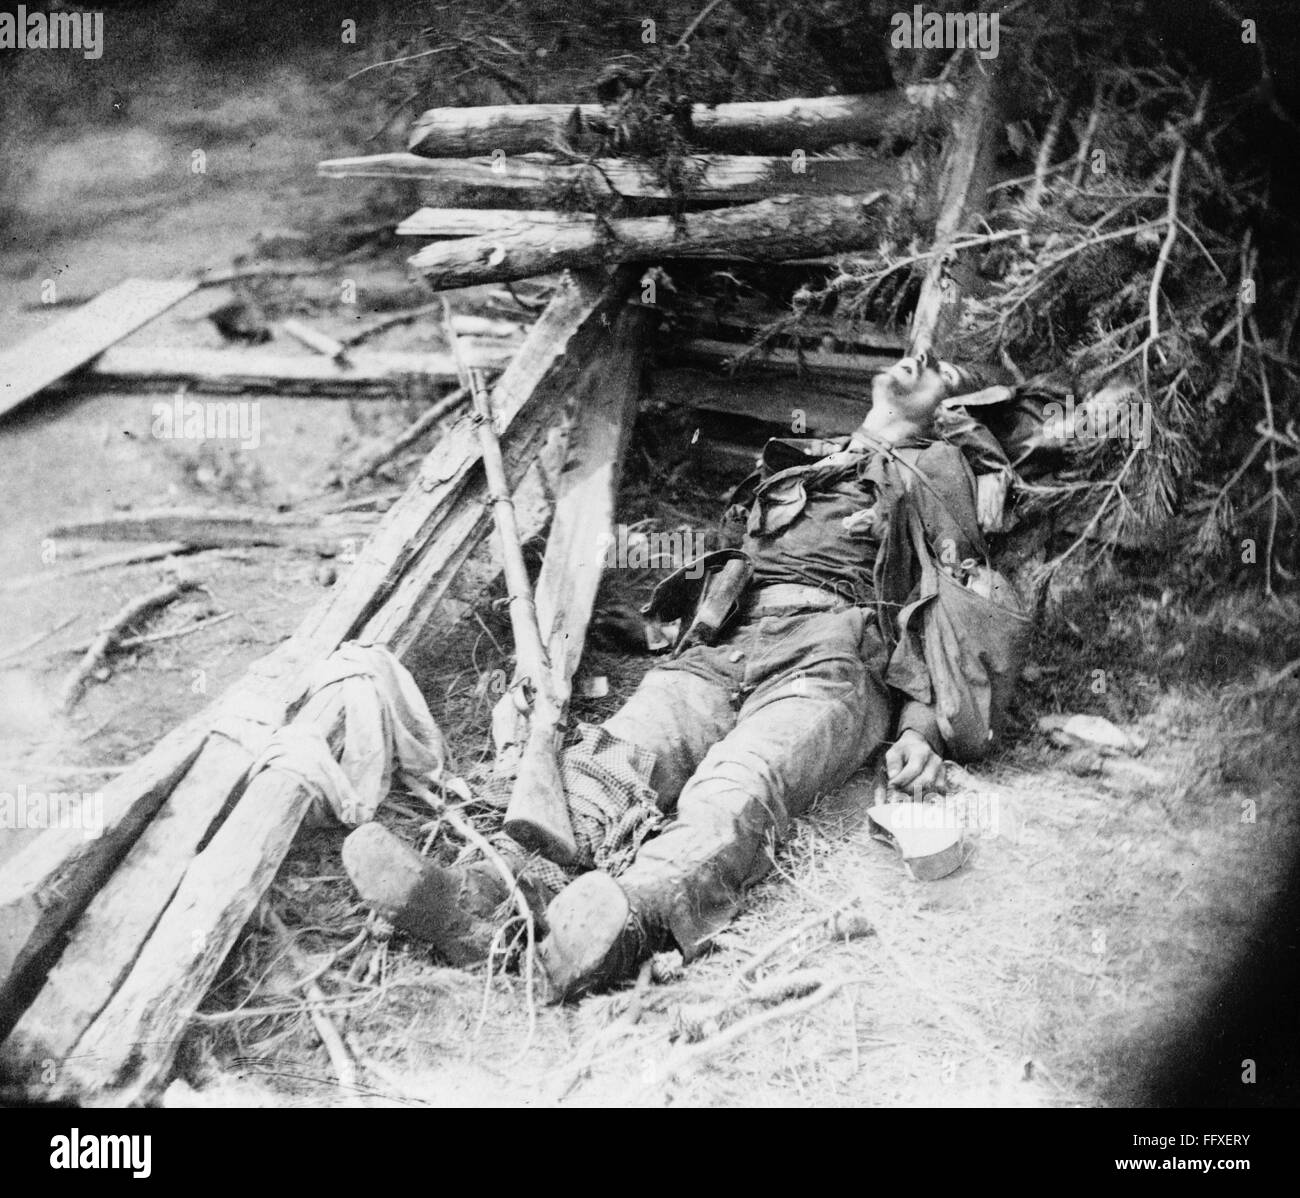 CIVIL WAR: DEAD SOLDIER. /nA dead Confederate soldier who fell during General Richard Ewell's attack on the Union Army at the Battle of Spotsylvania Court House in Virginia. Photograph, 19 May 1864. Stock Photo